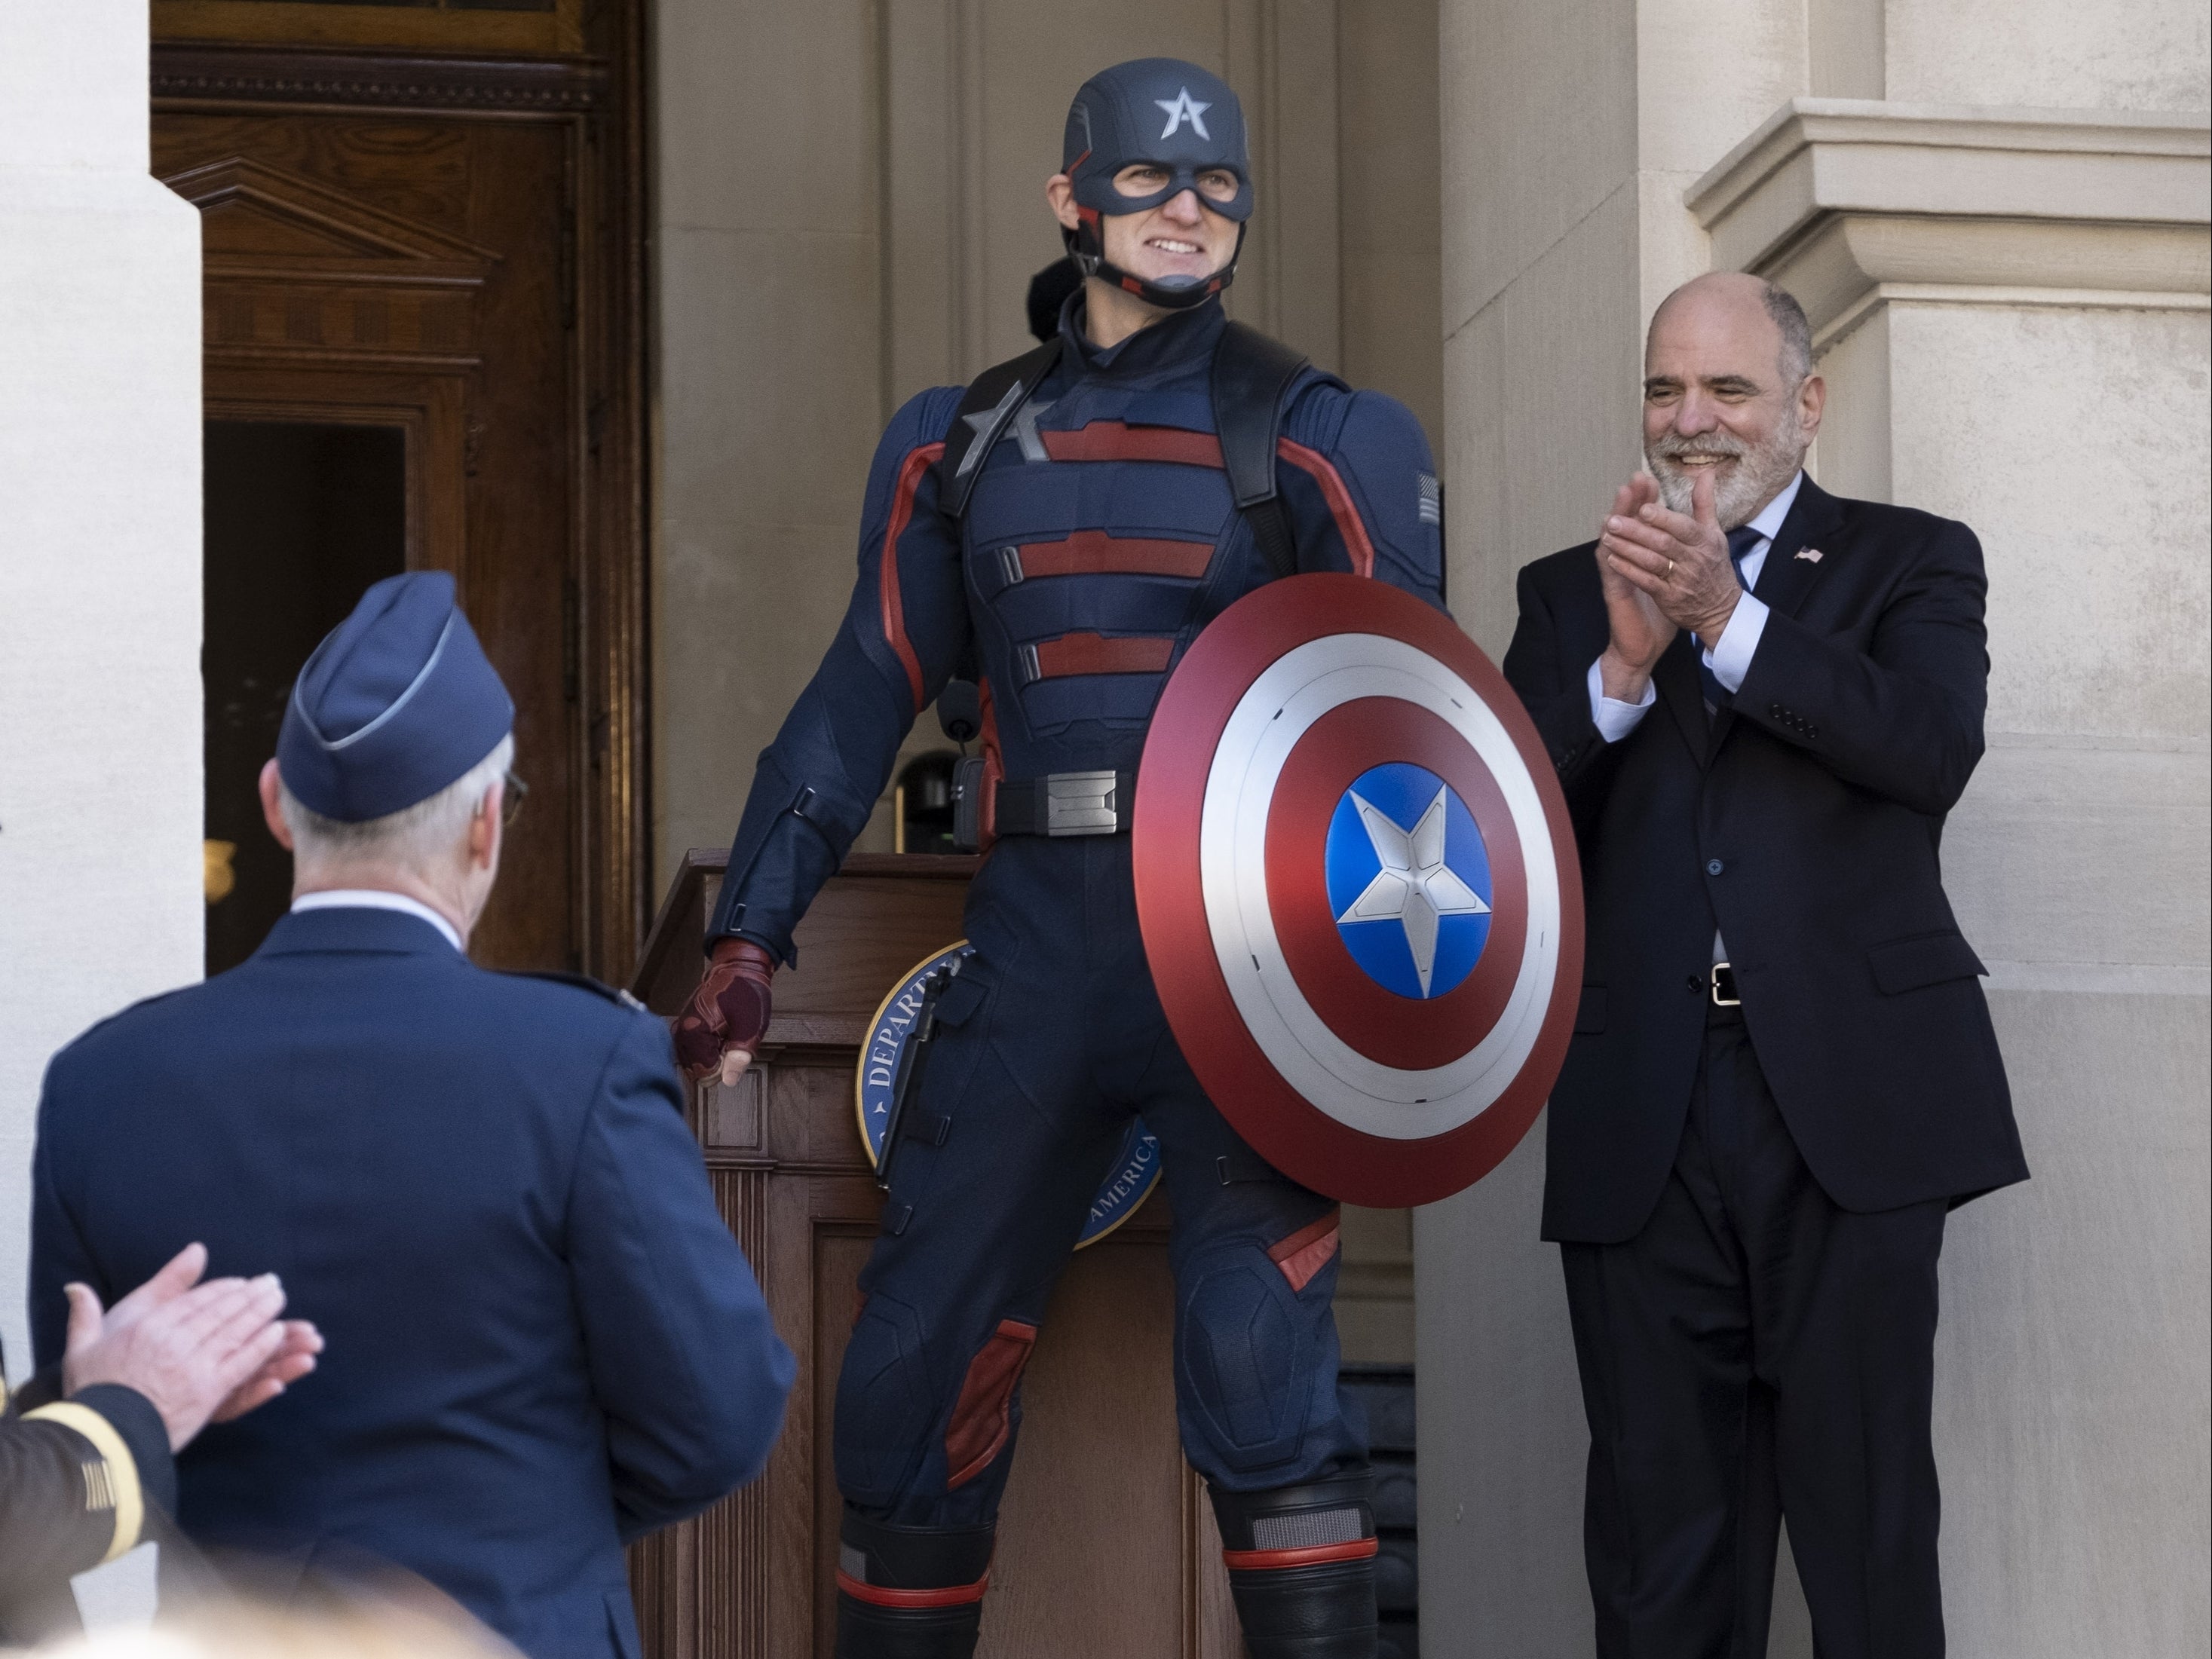 The new Captain America is unveiled during episode one of The Falcon and the Winter Soldier